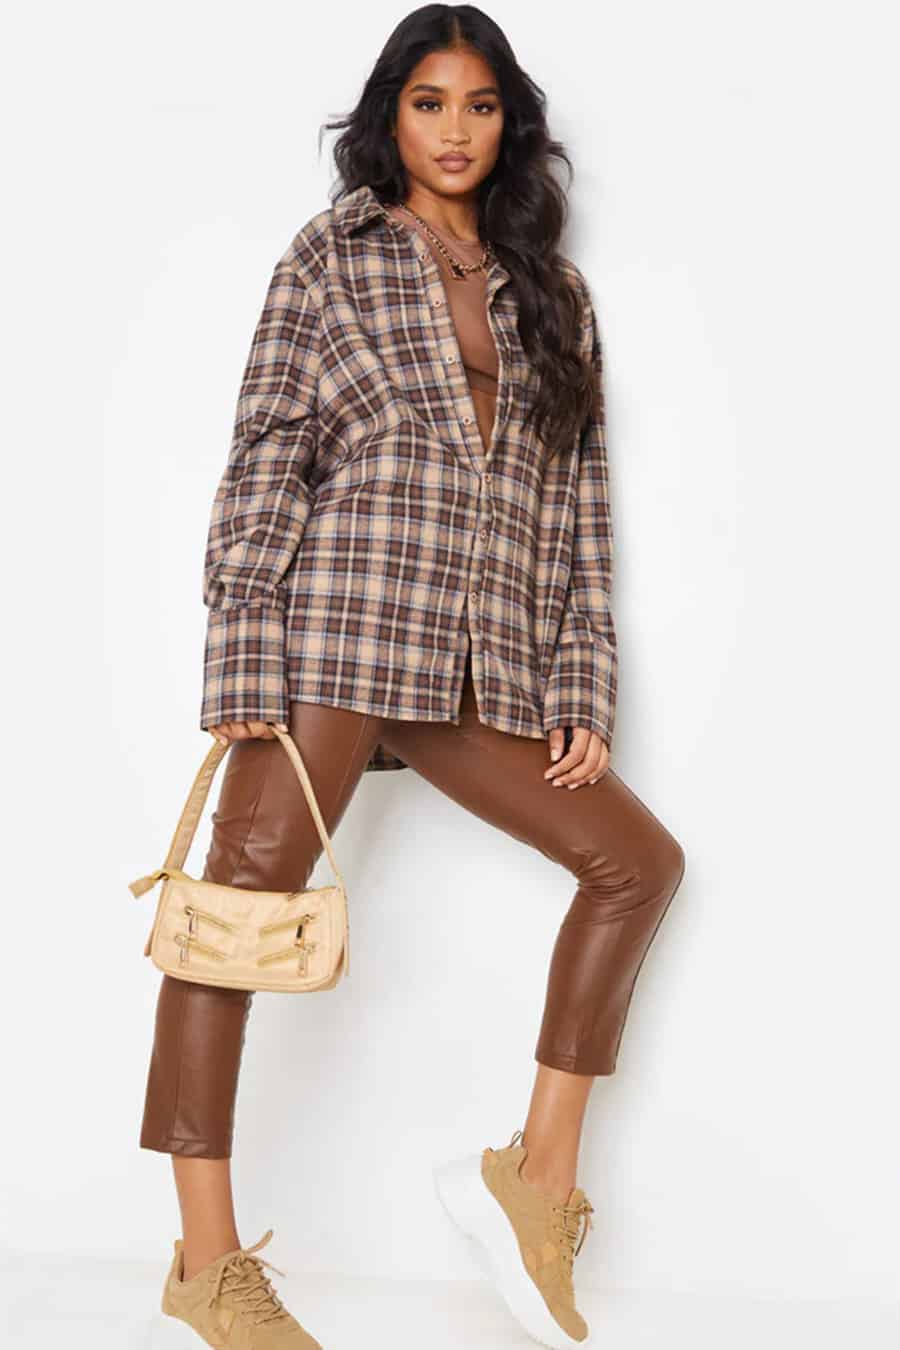 Loose fitting shirt with brown pants